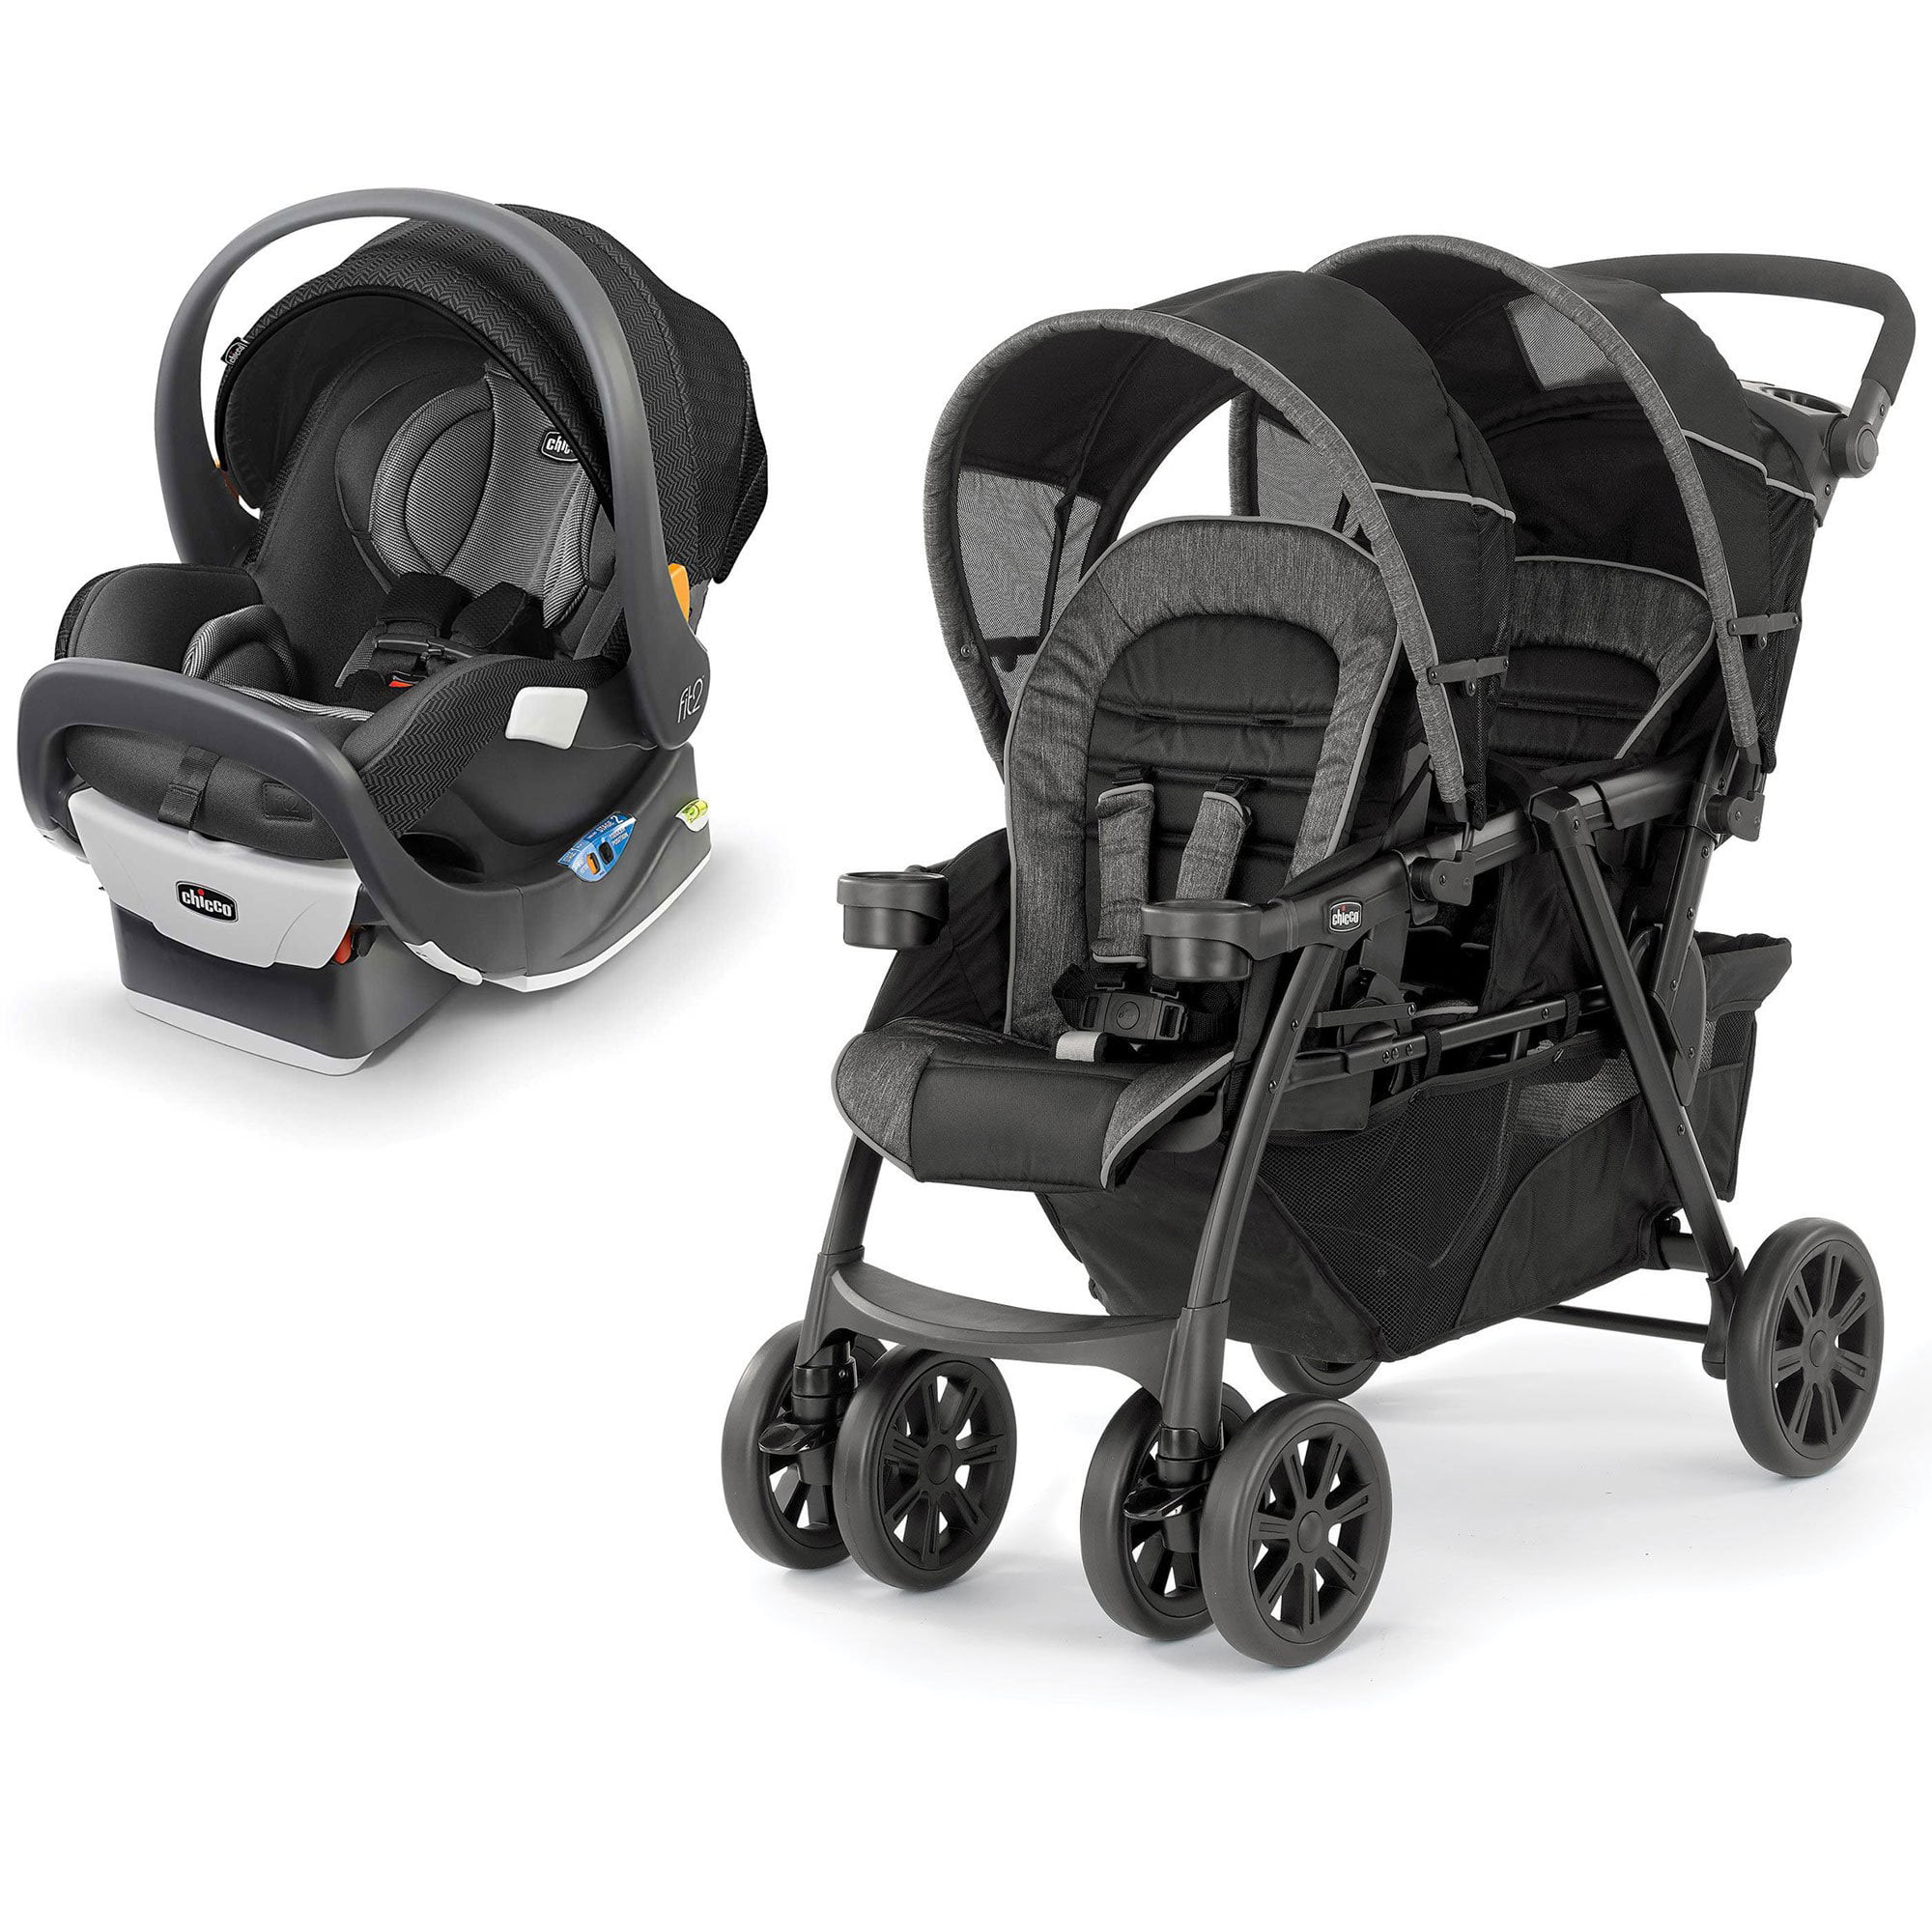 Chicco Fit2 Infant & Toddler Car Seat, Tempo w/ Double Folding Stroller